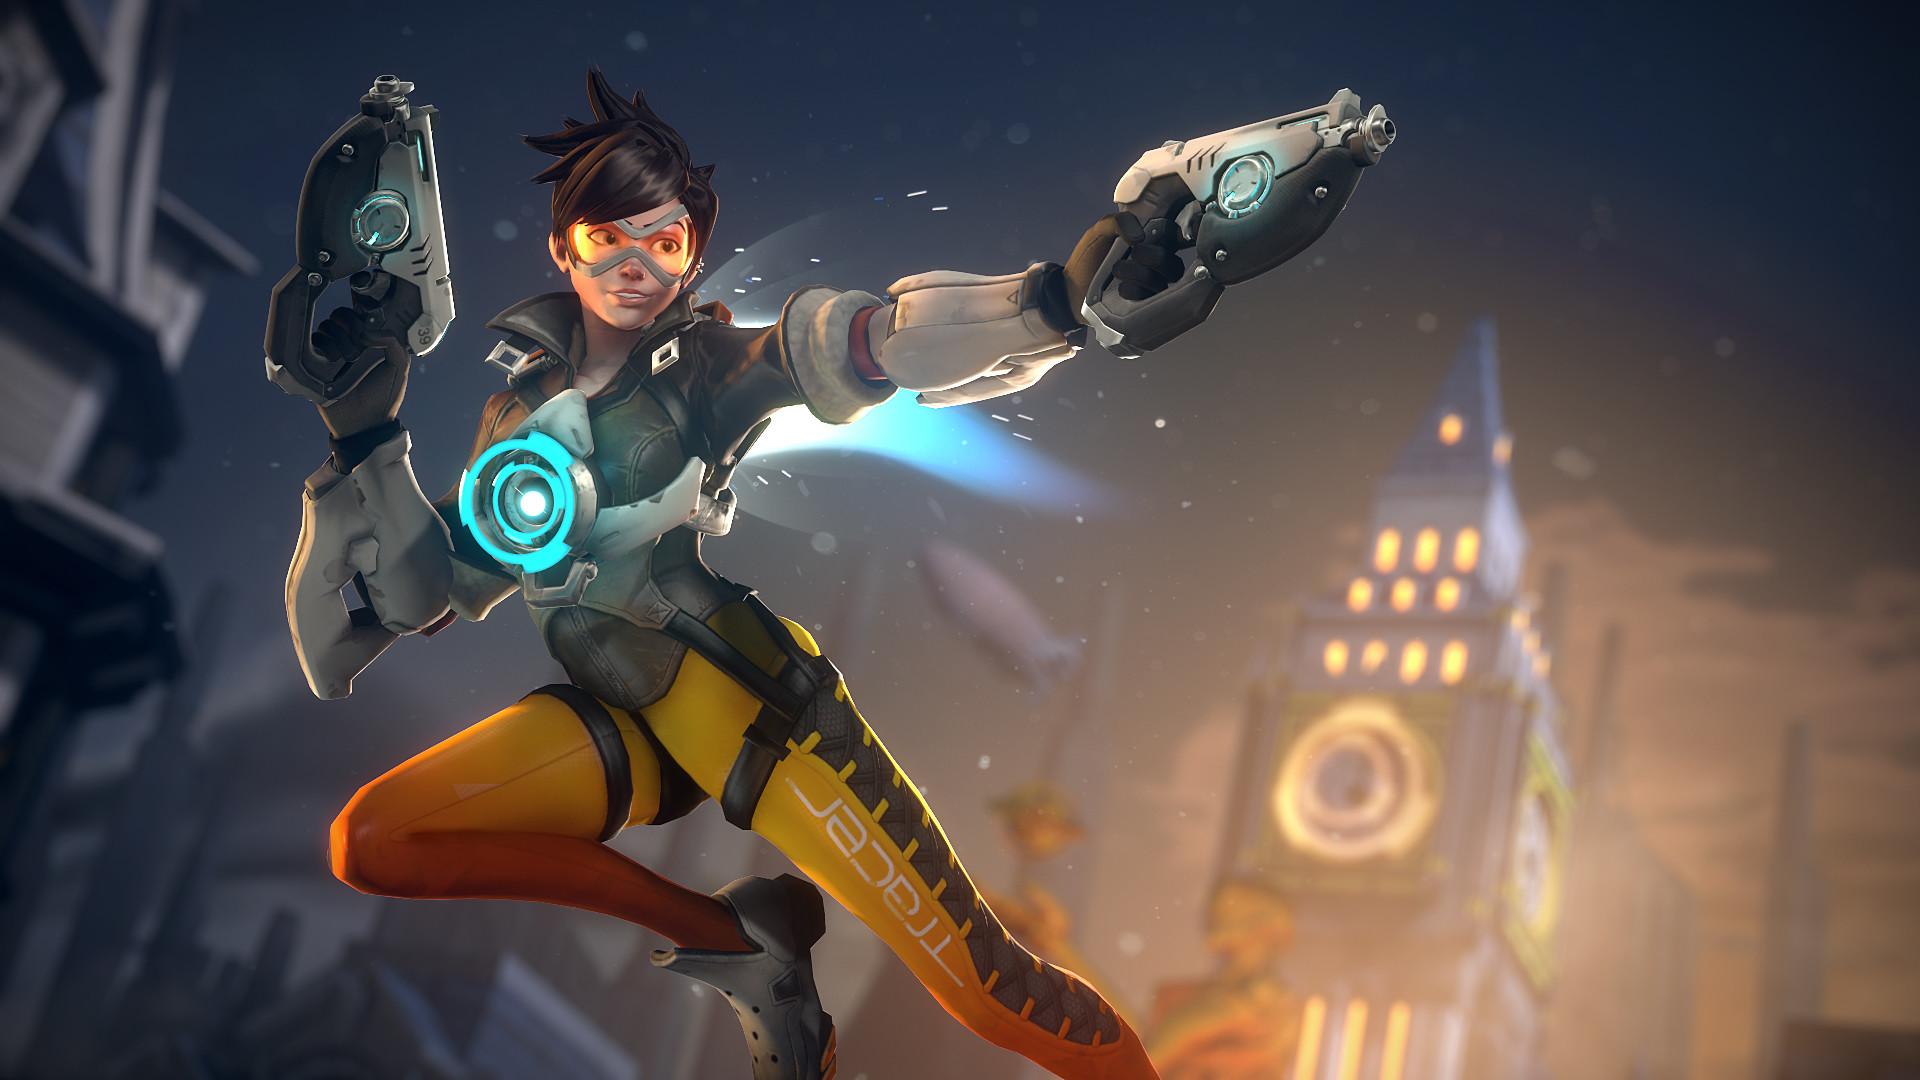 Wallpaper Art, tracer, overwatch, Tracer for mobile and desktop, section  игры, resolution 1920x1080 - download